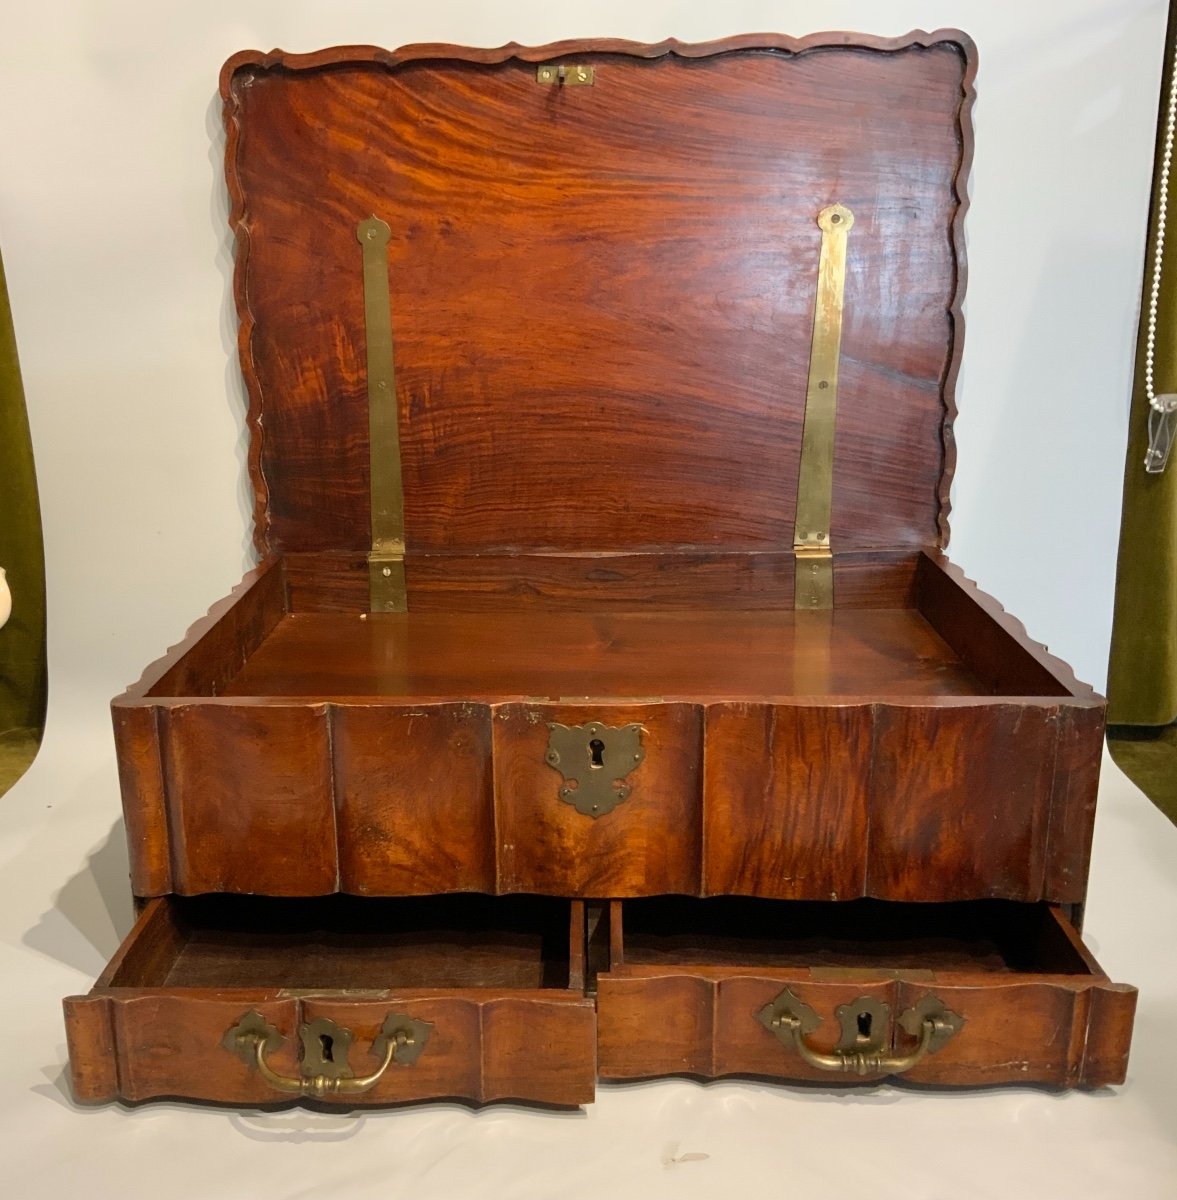 Large Colonial Wooden Travel Box XVIIIth Century